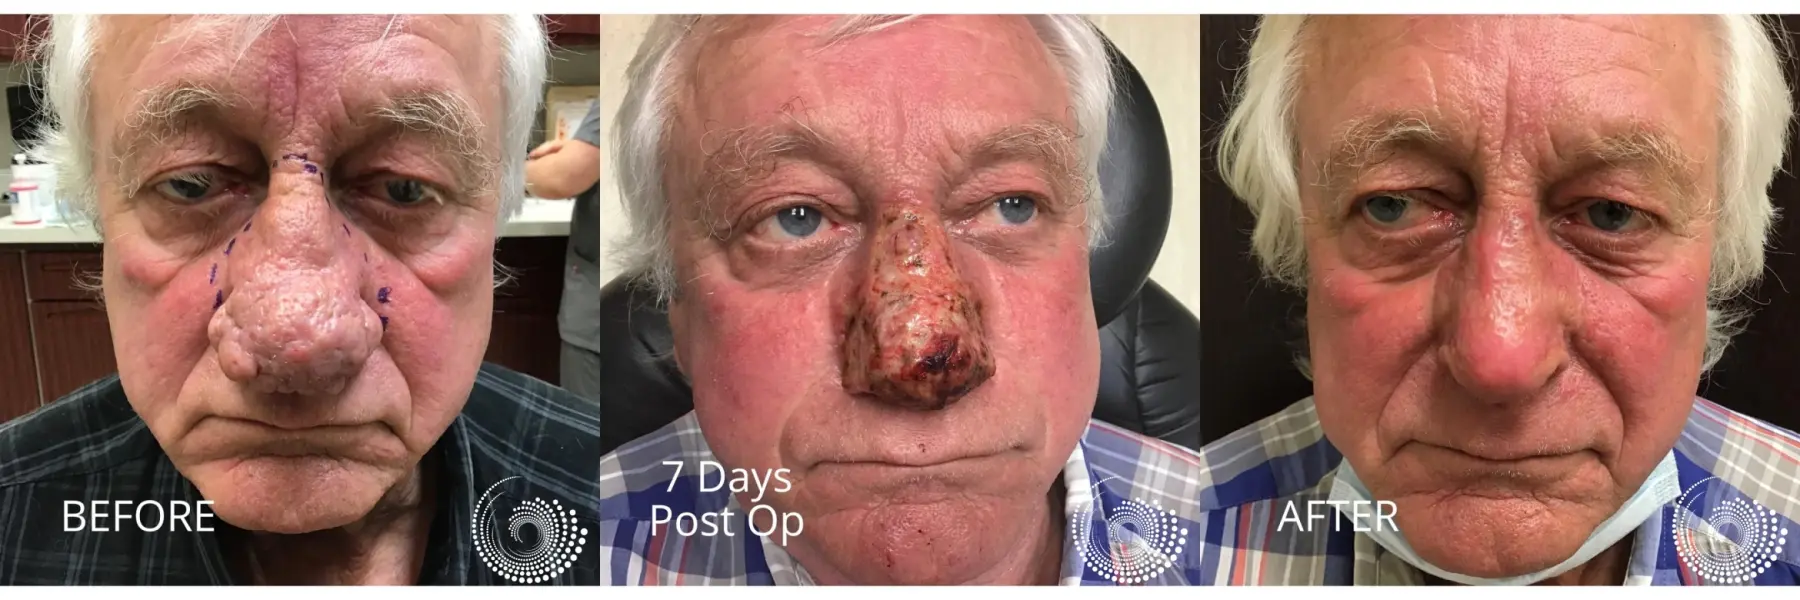 Rhinophyma treatment to restore nose - Before and After